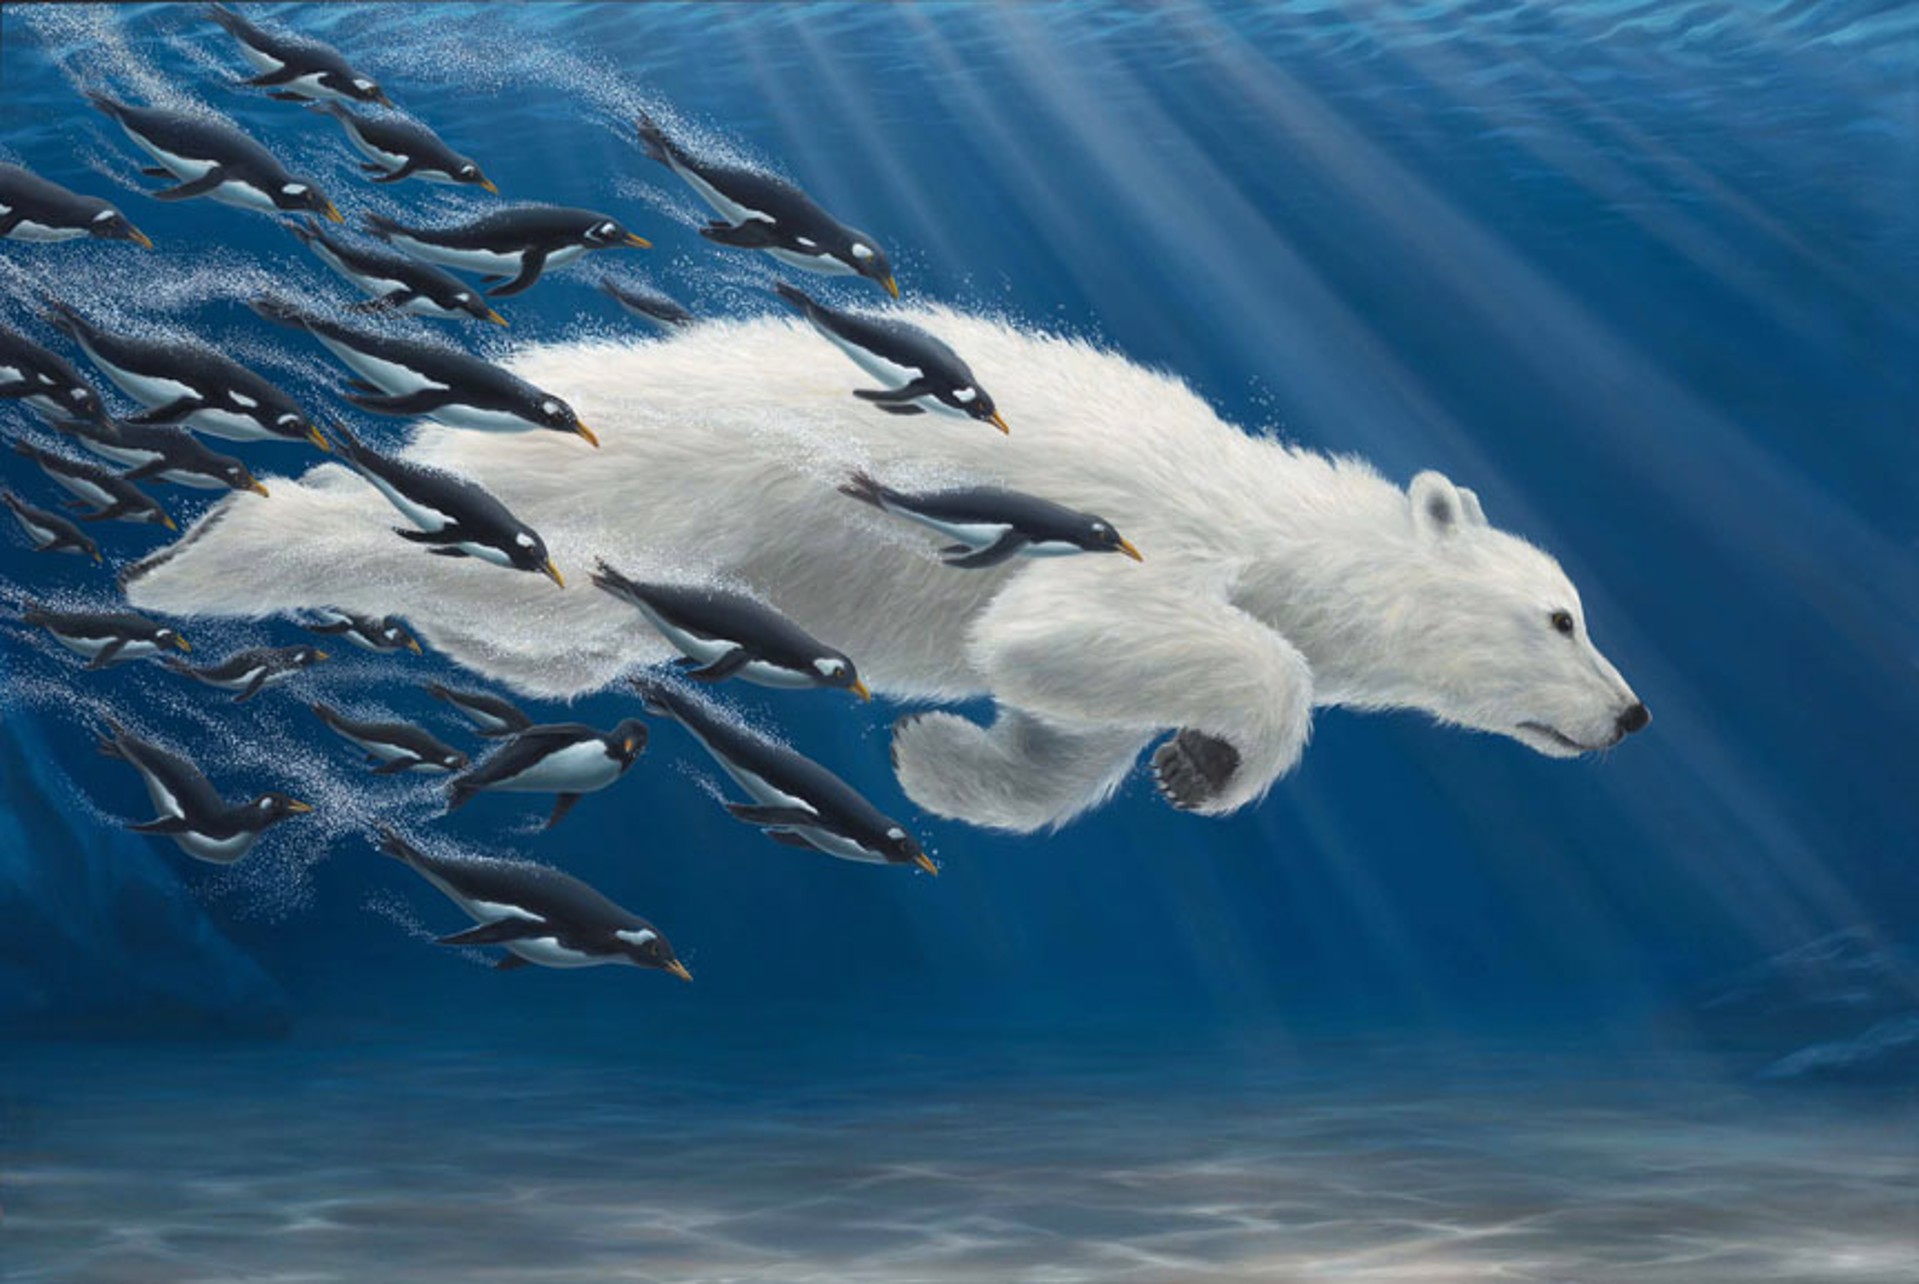 The Chase - SOLD OUT ON ALL EDITIONS by Robert Bissell